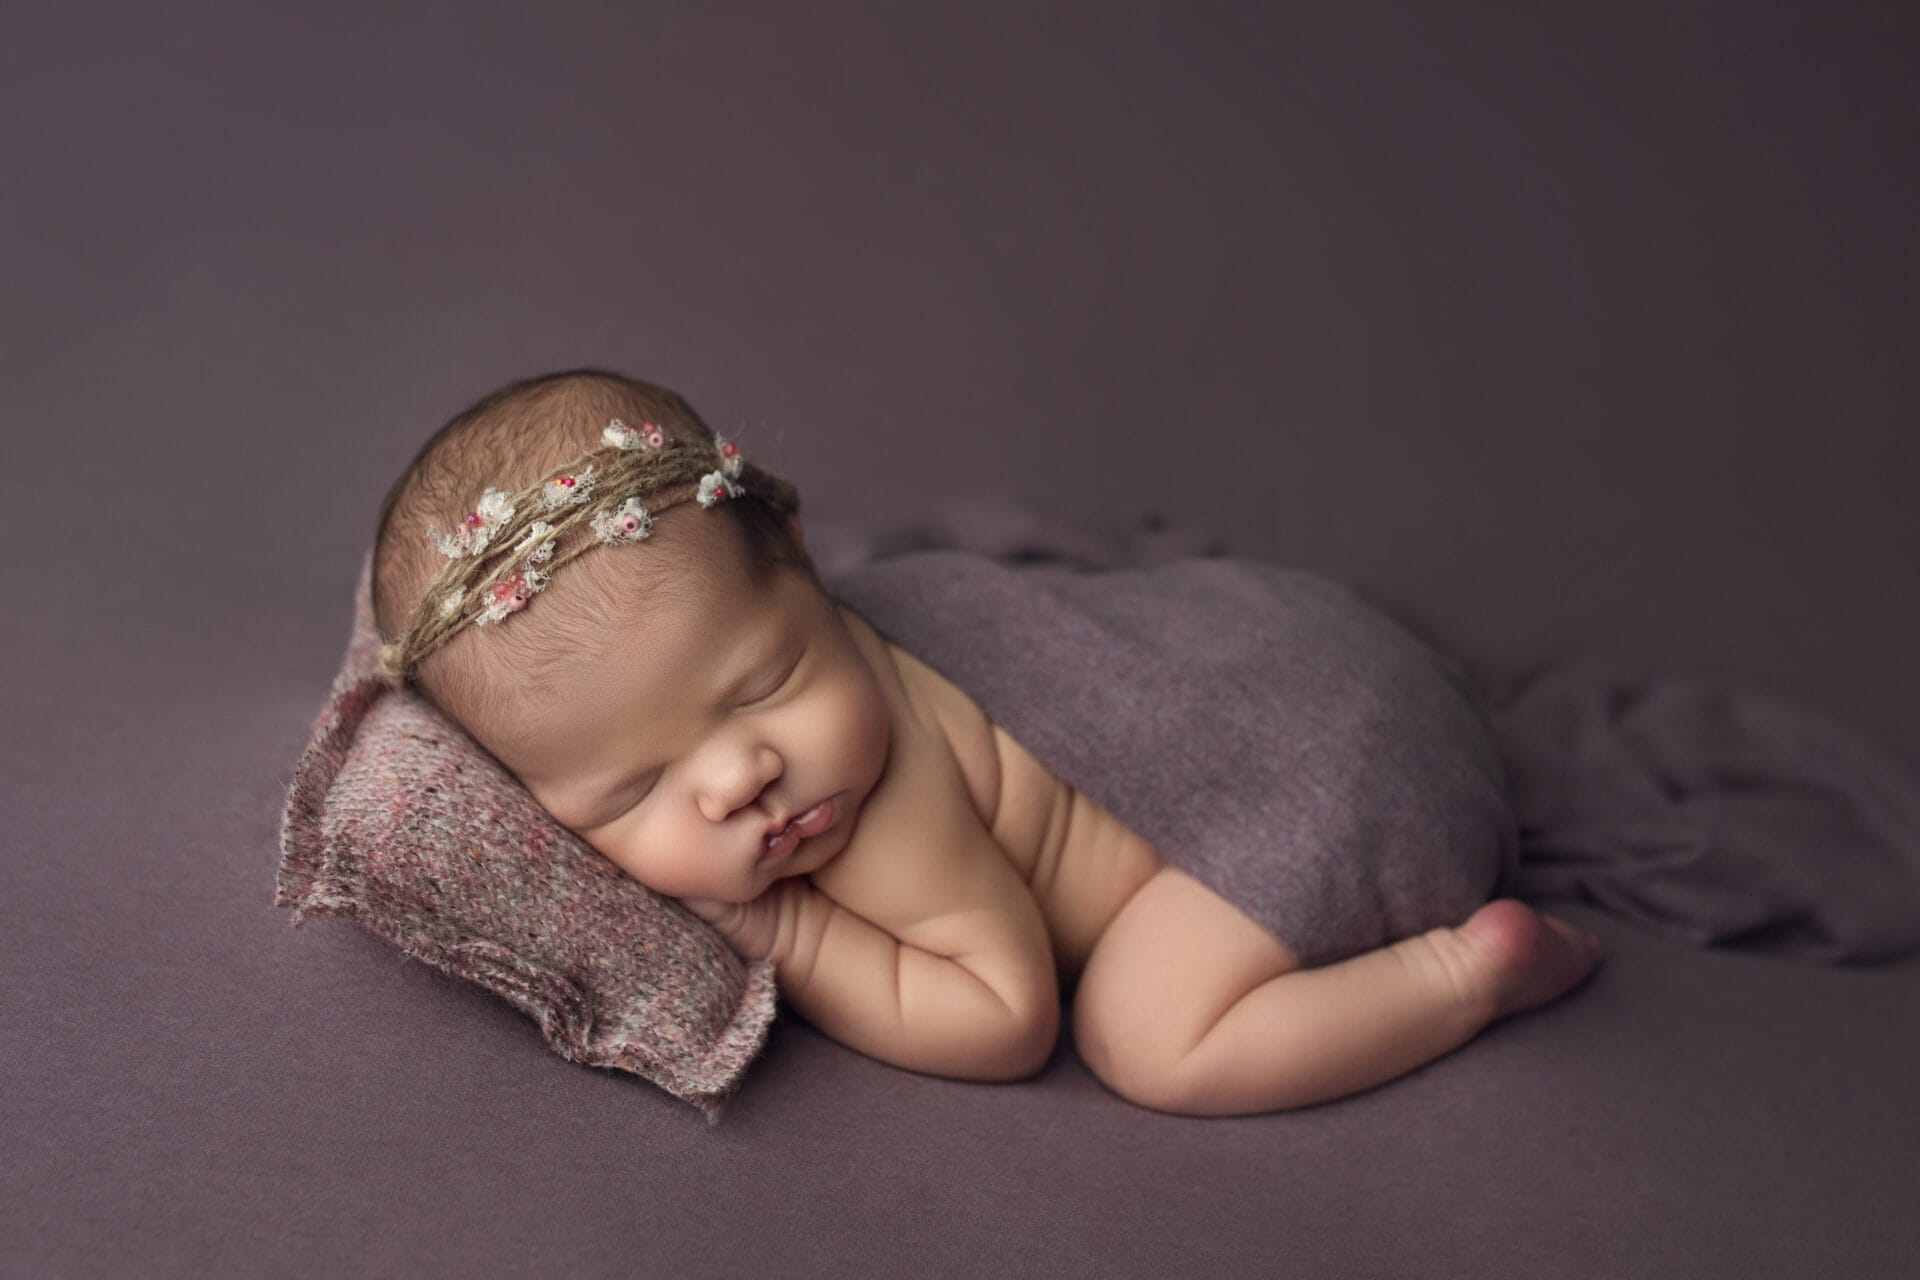 A newborn baby girl cuddled on the purple backdrop with a purple pillow.